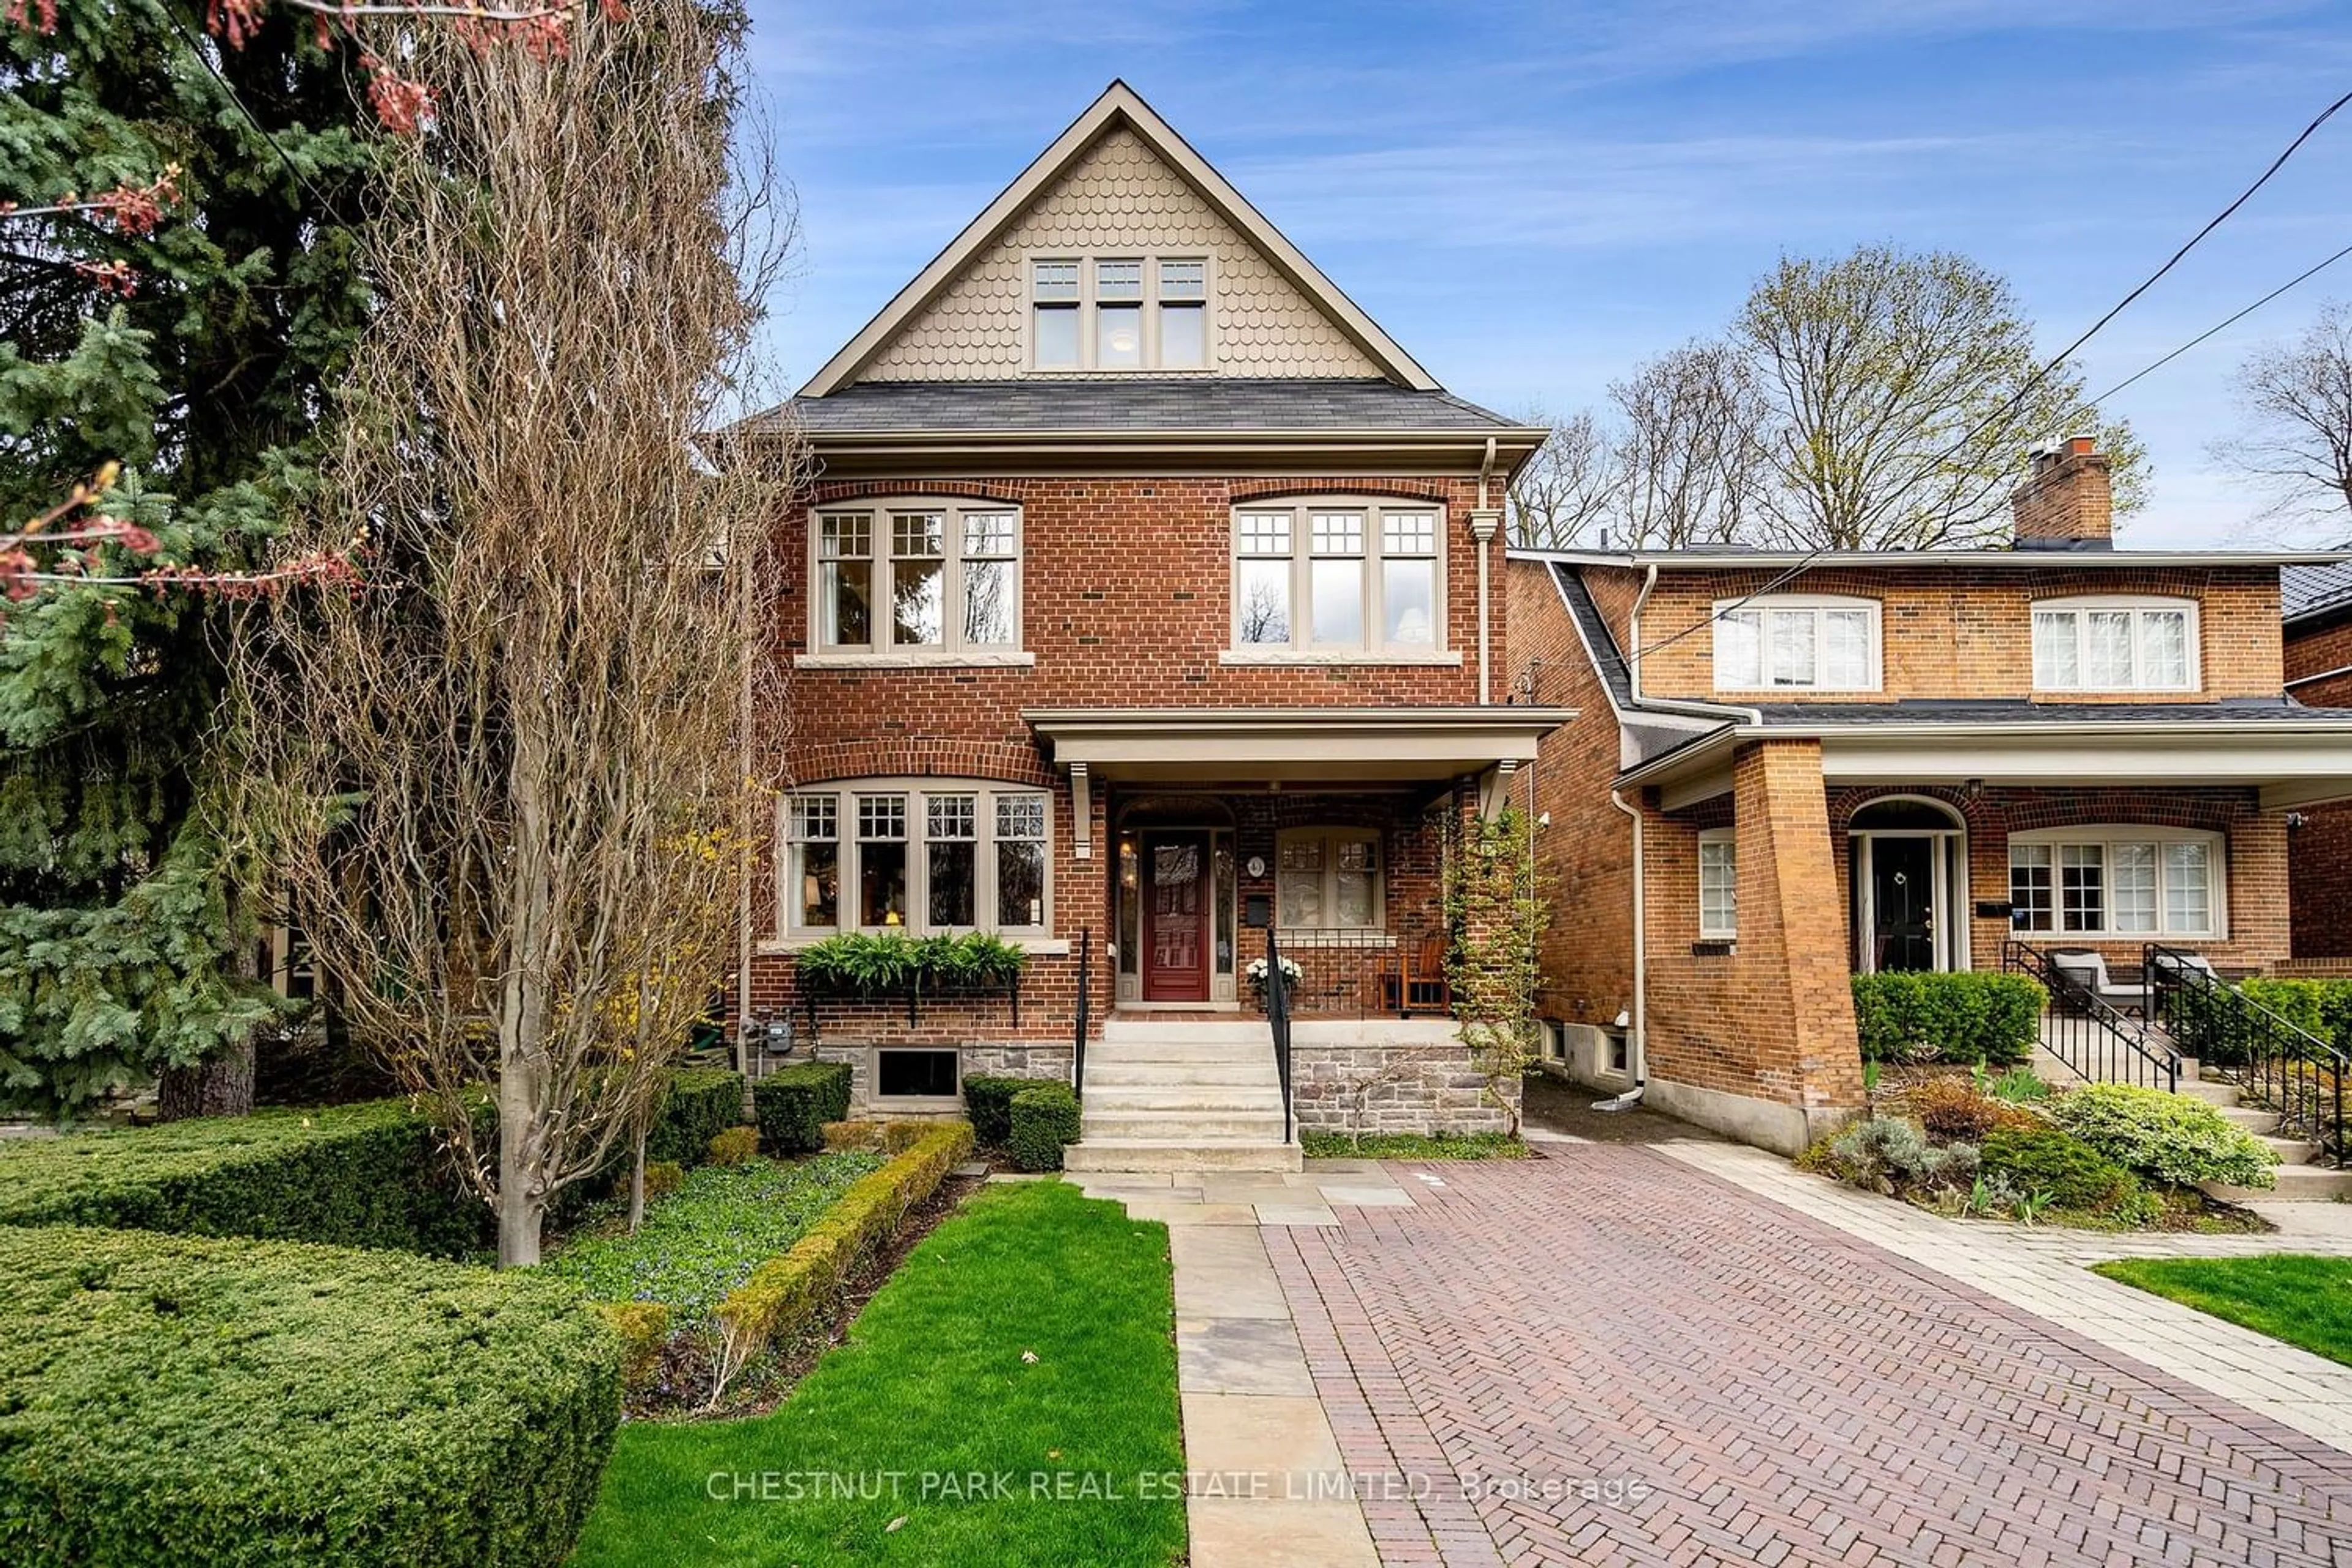 Home with brick exterior material for 43 Inglewood Dr, Toronto Ontario M4T 1G9